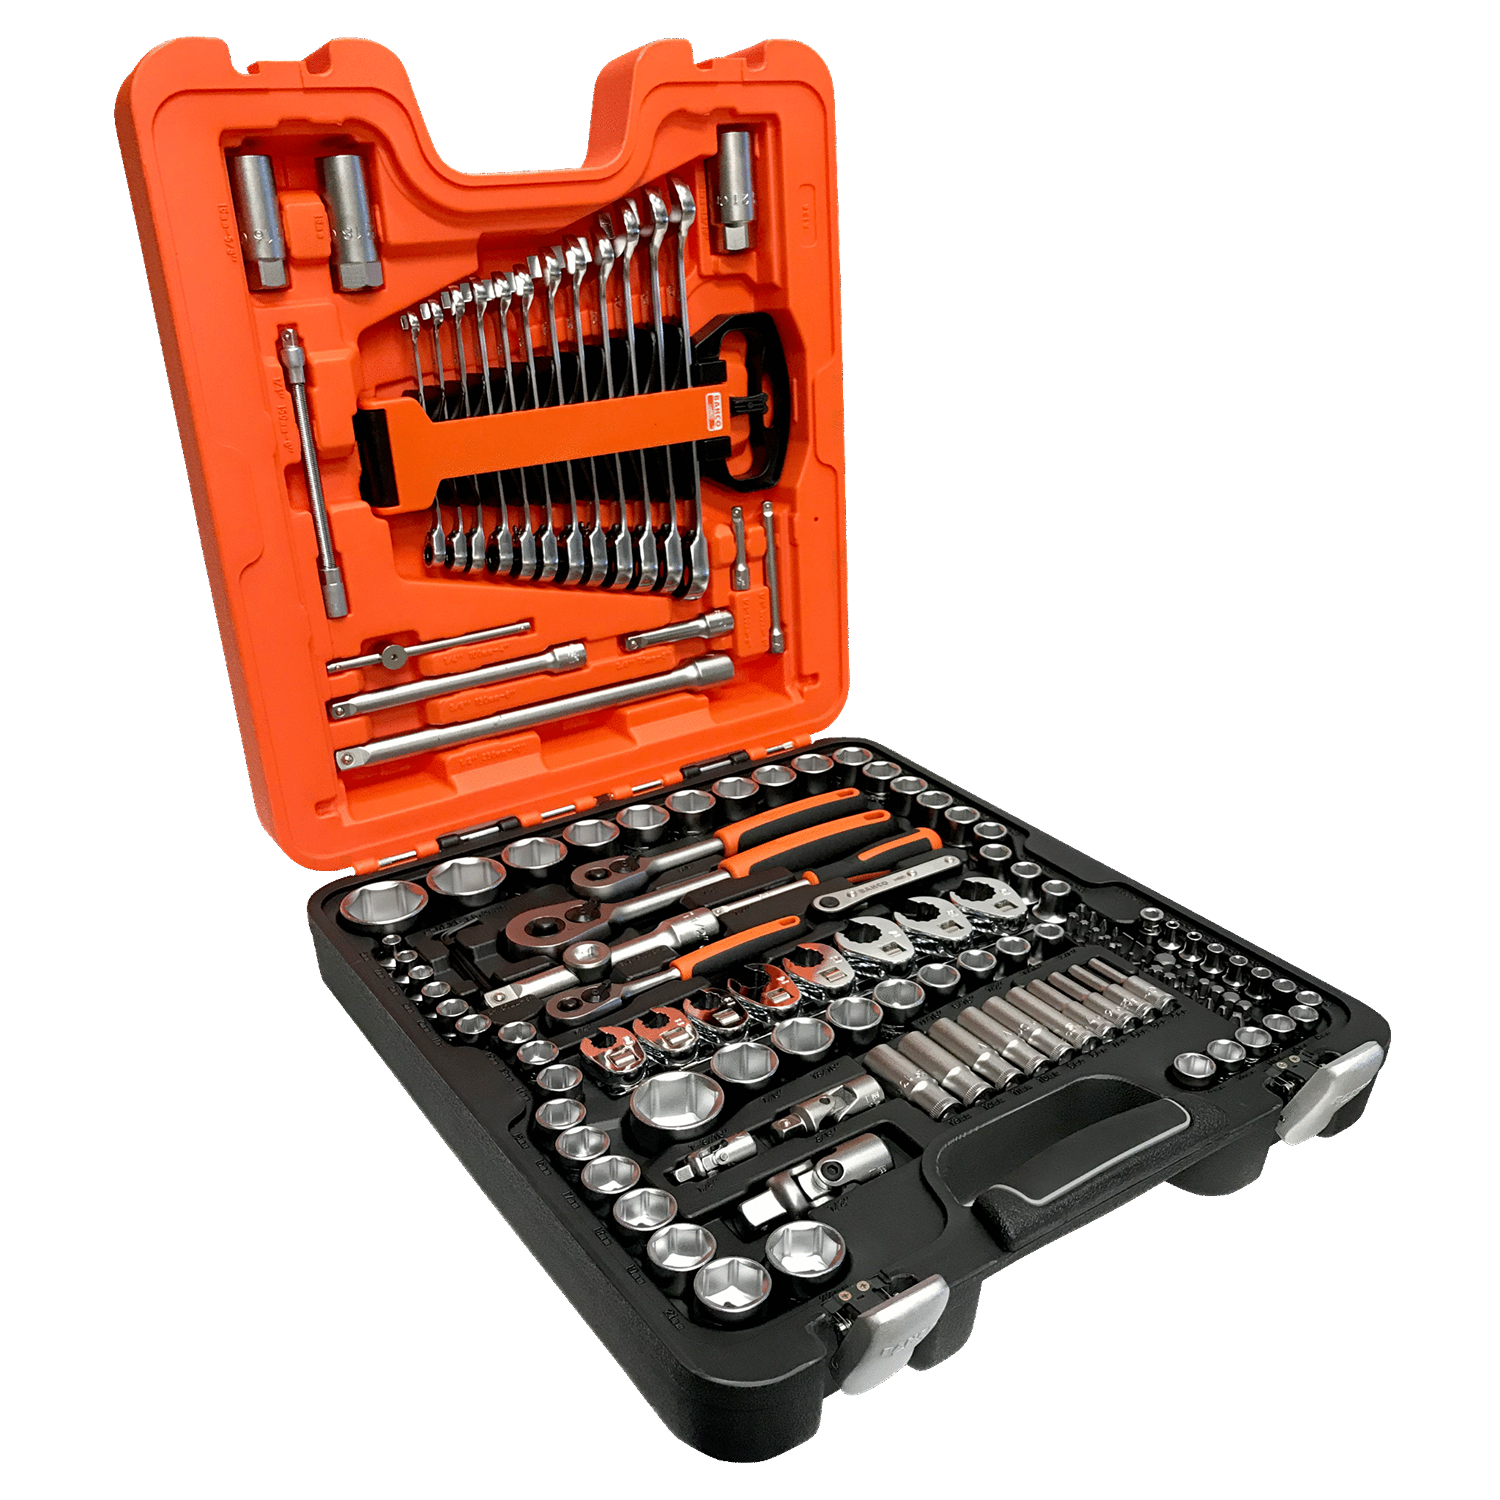 BAHCO S137 1/4” 3/8” And 1/2” Square Drive Socket Set - Premium Socket Set from BAHCO - Shop now at Yew Aik.